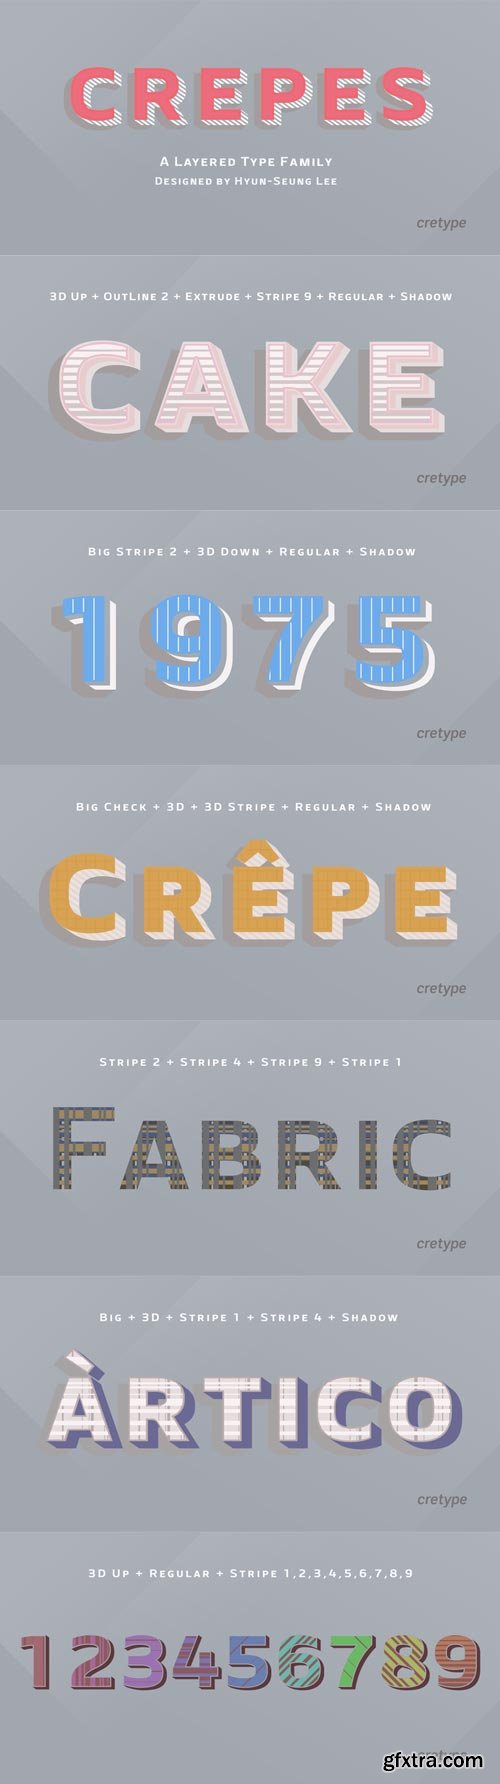 Crepes Font Family $140